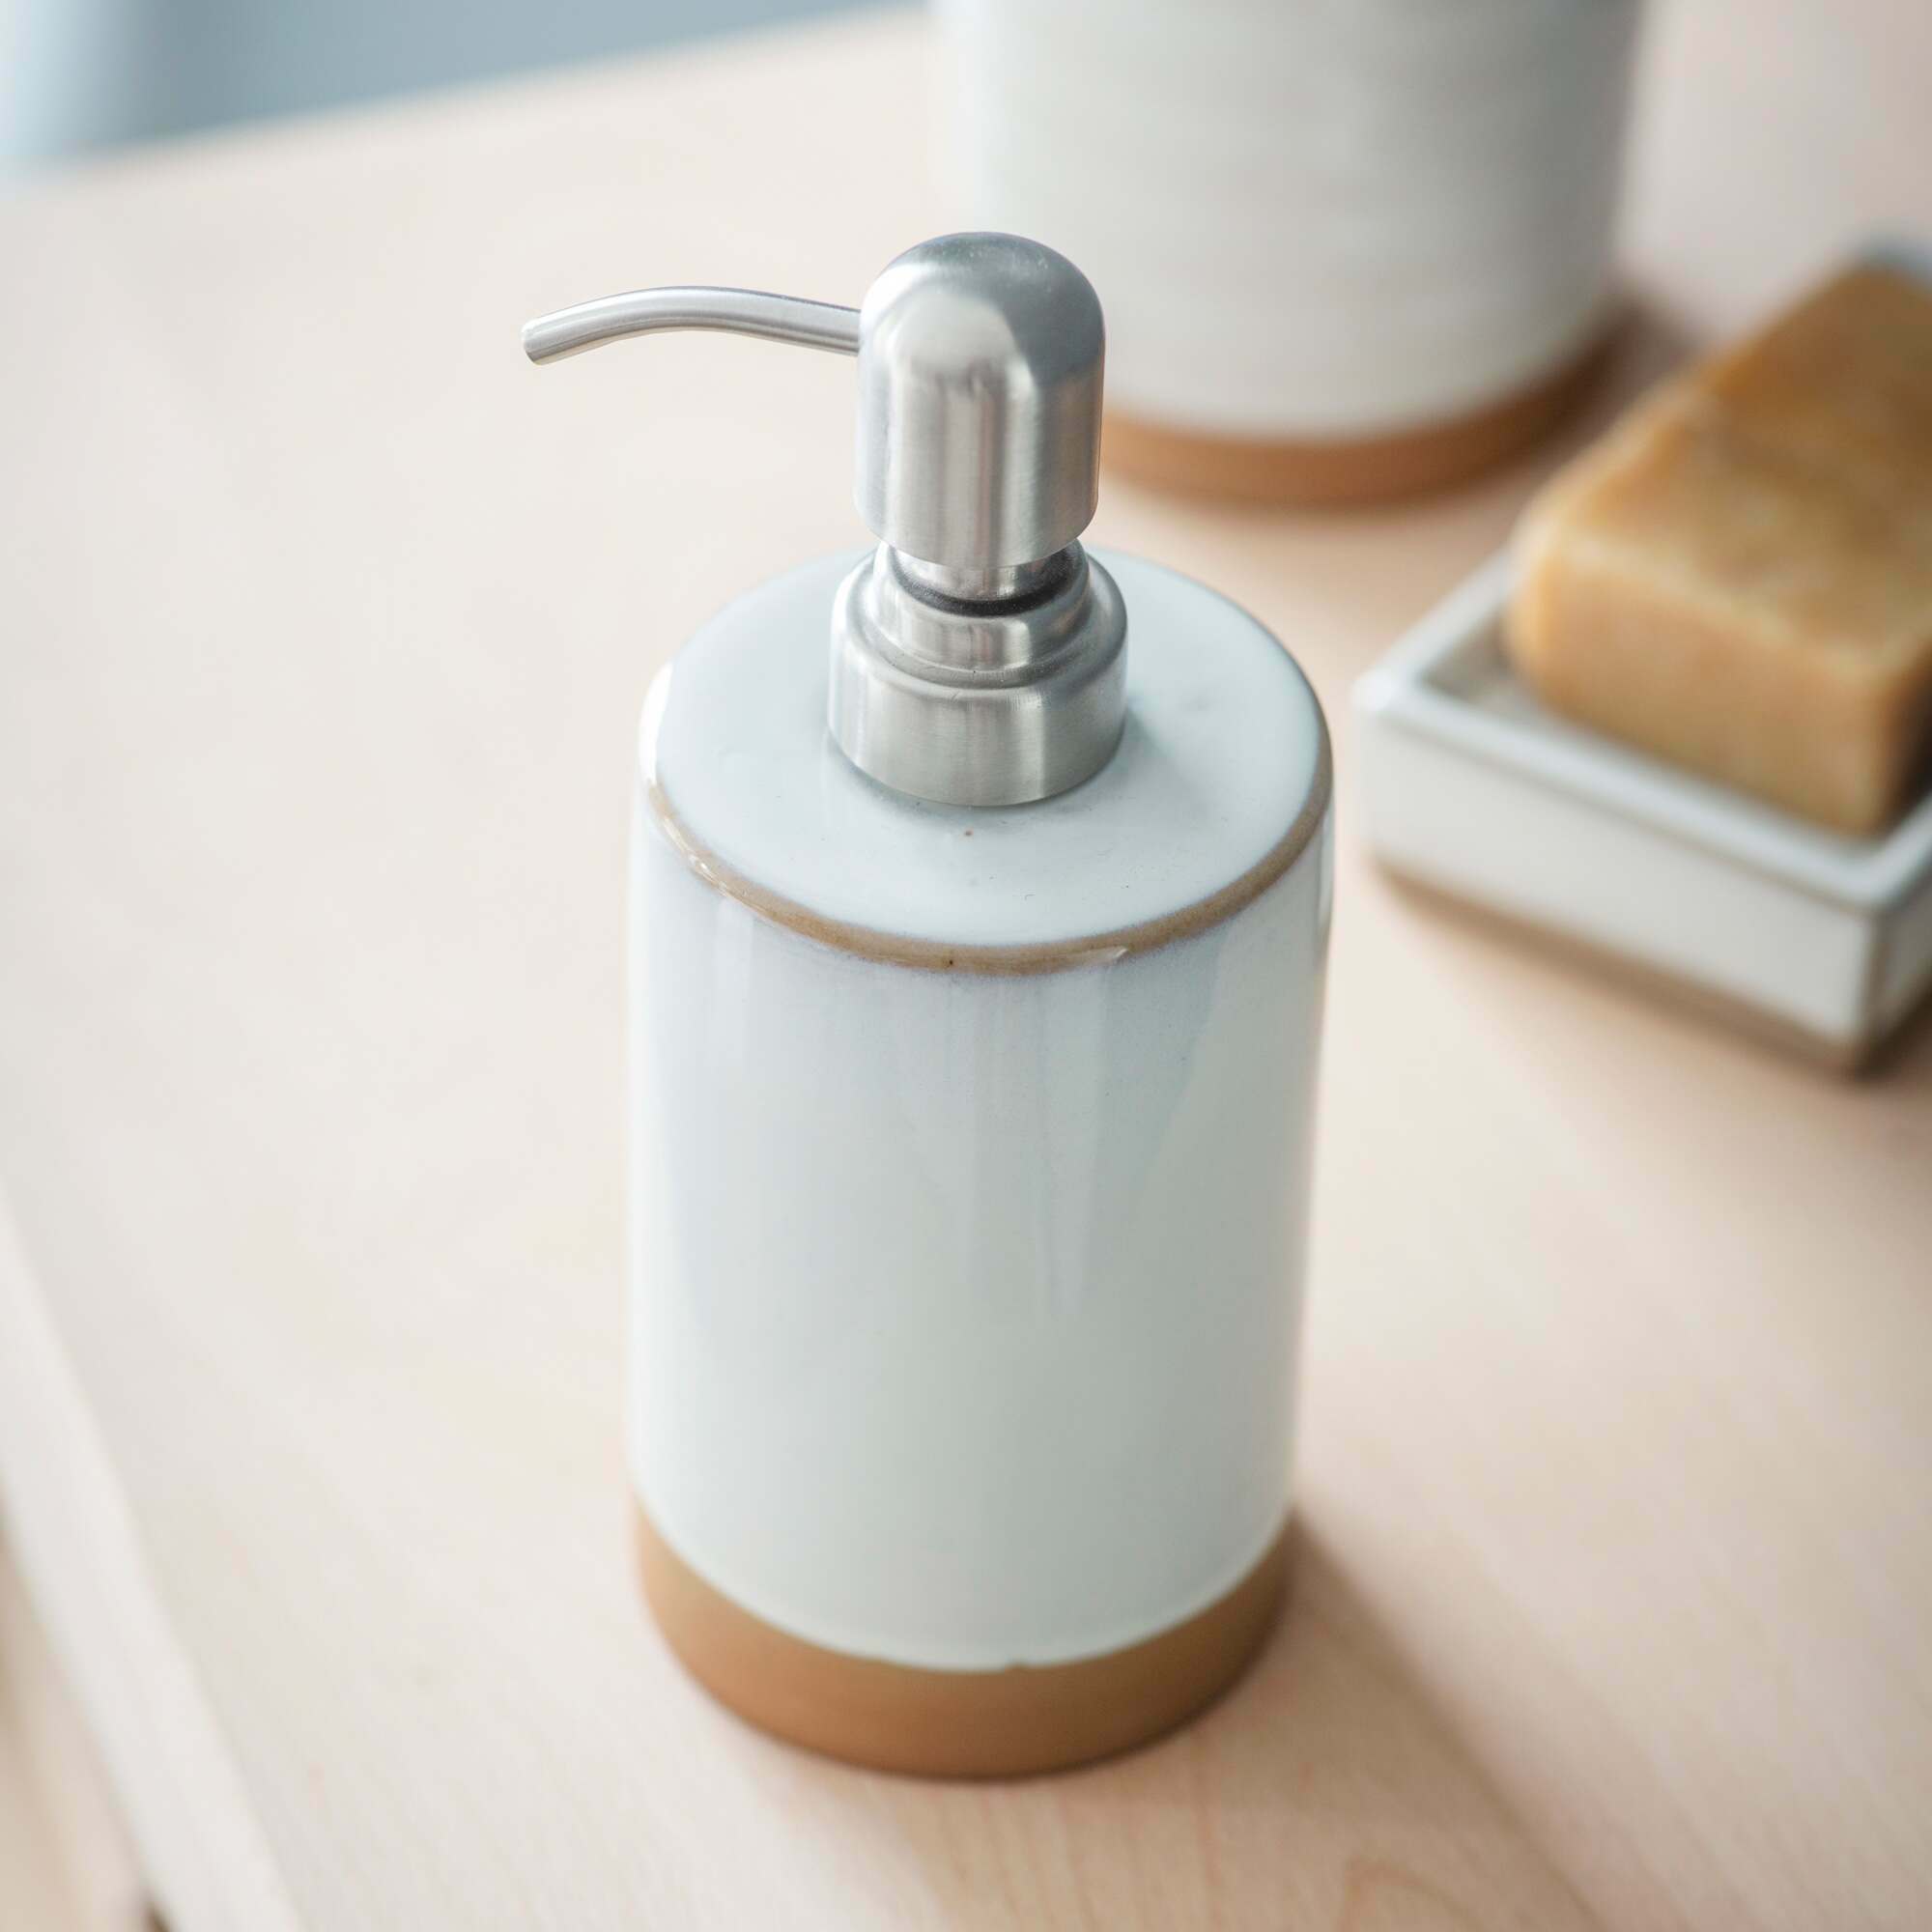 Read more about Graham and green ceramic soap dispenser